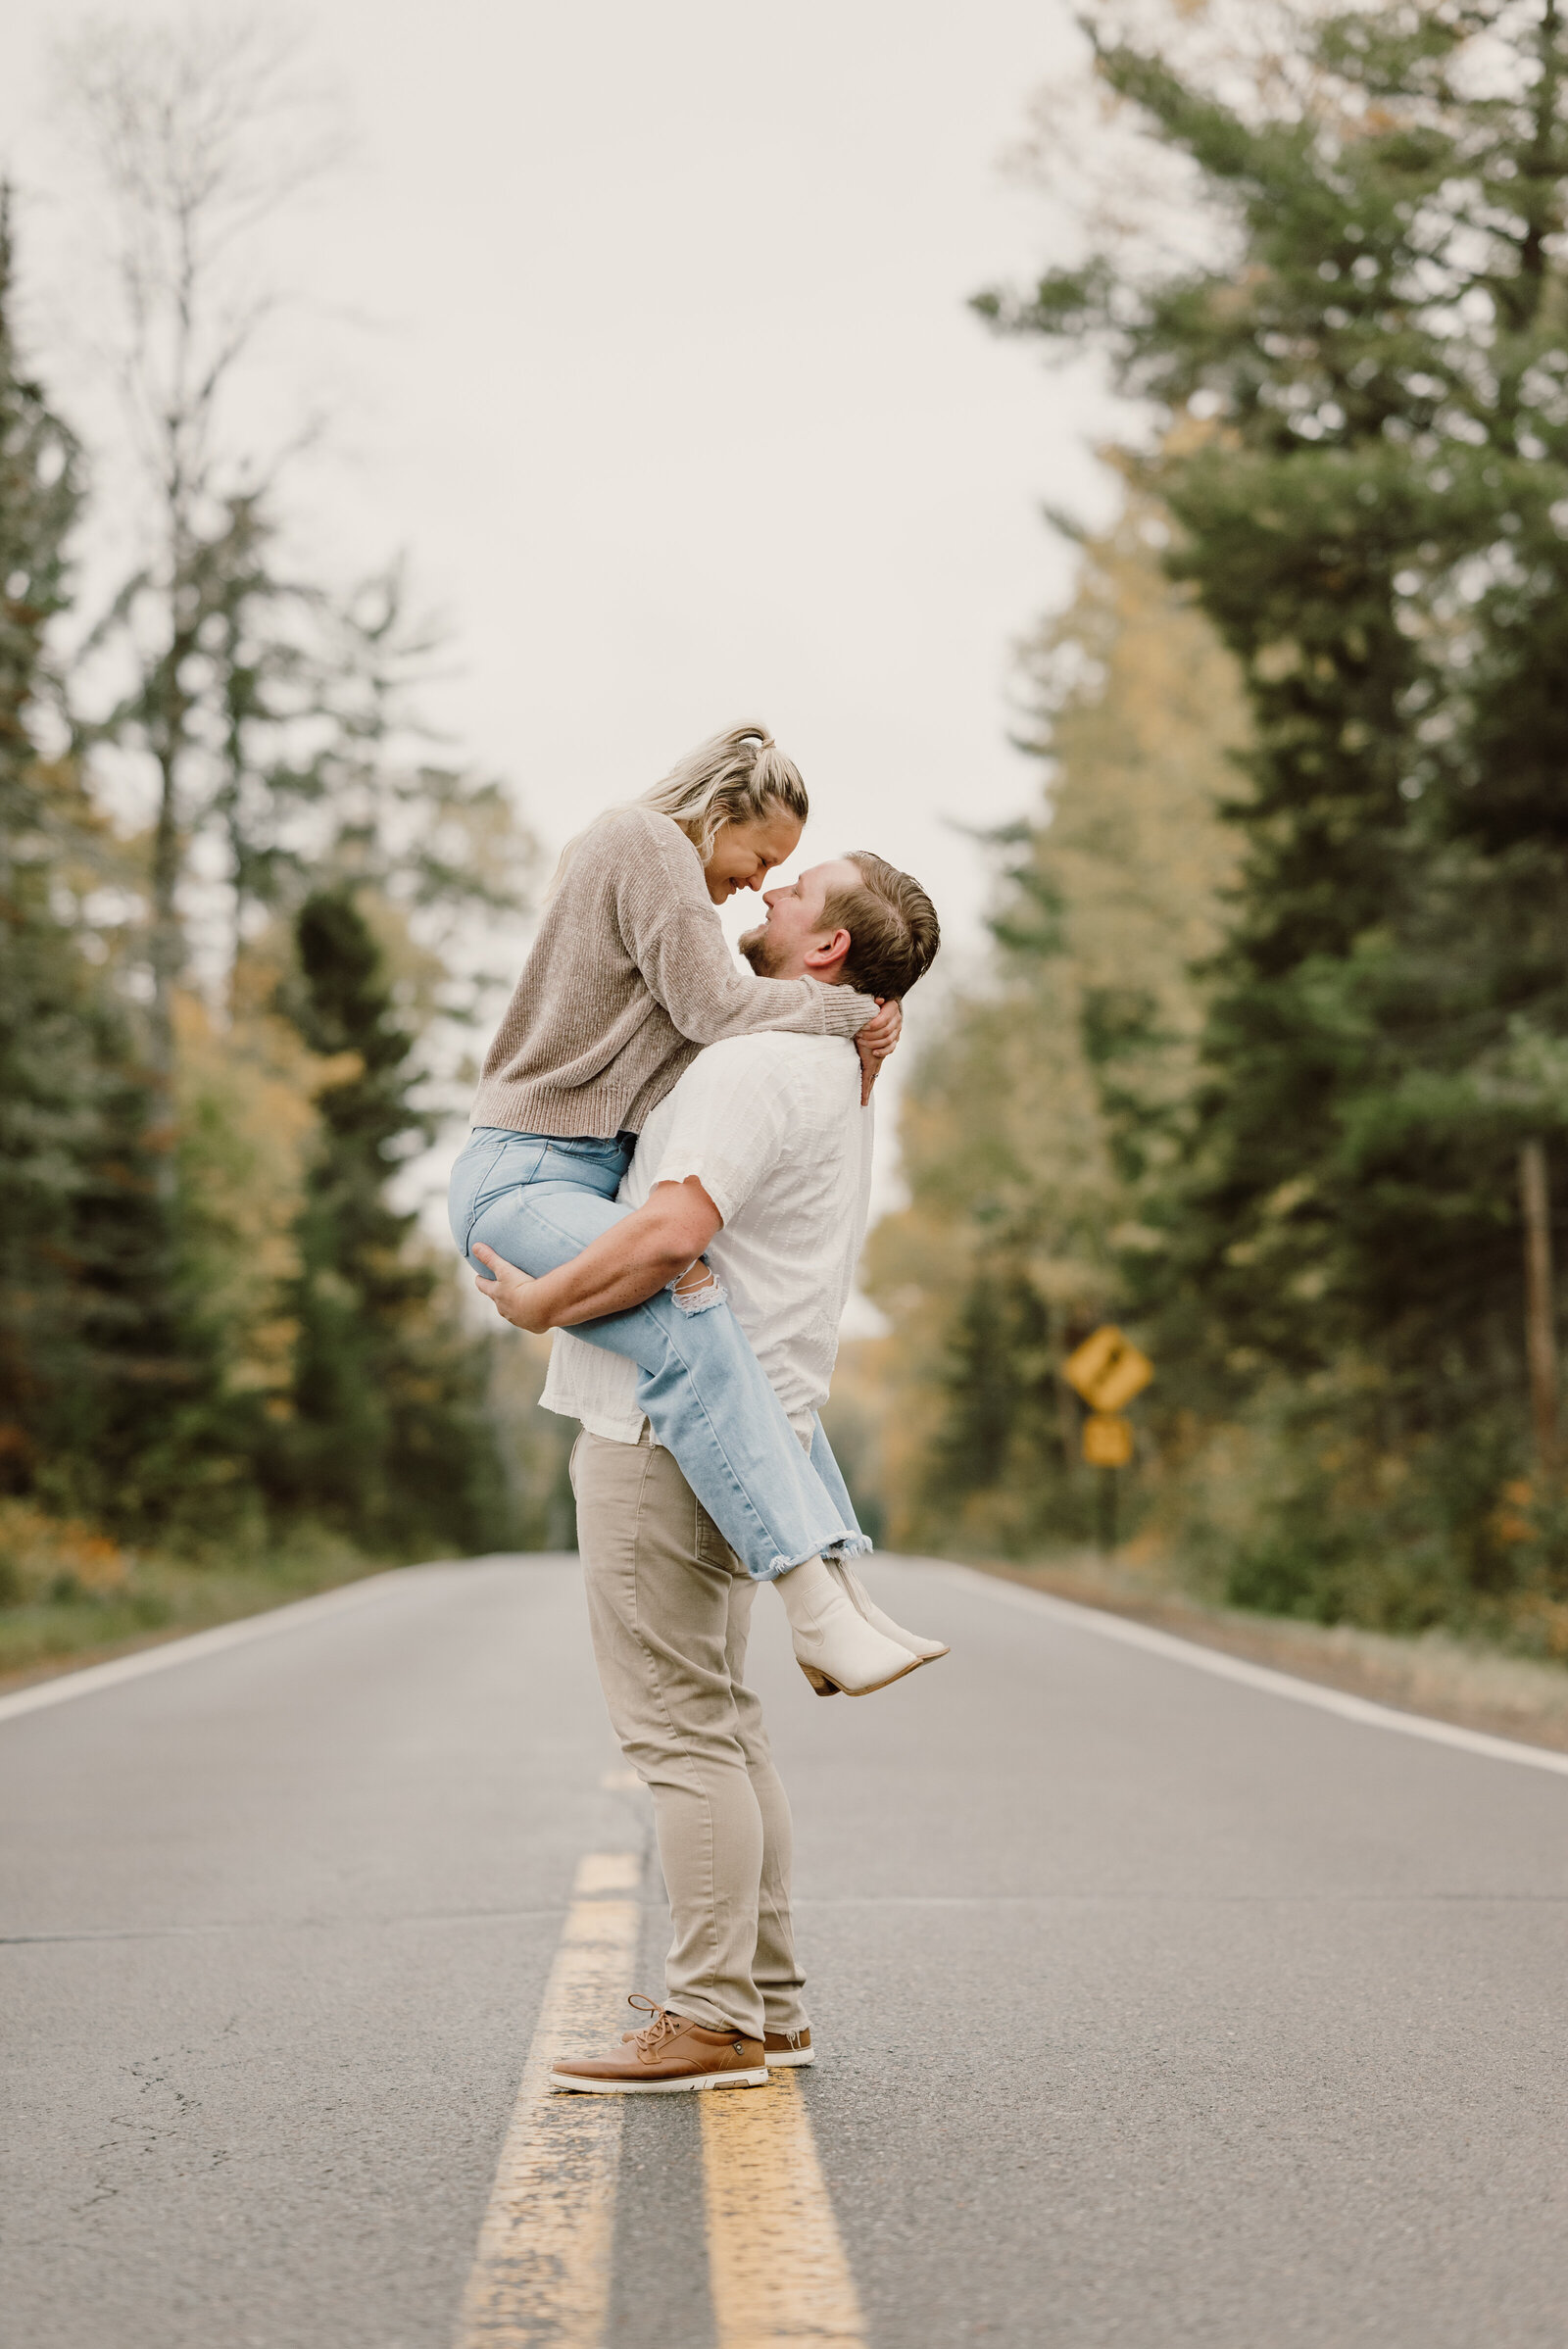 Fall engagement poses inspiration - man lift woman and wiggle their noses